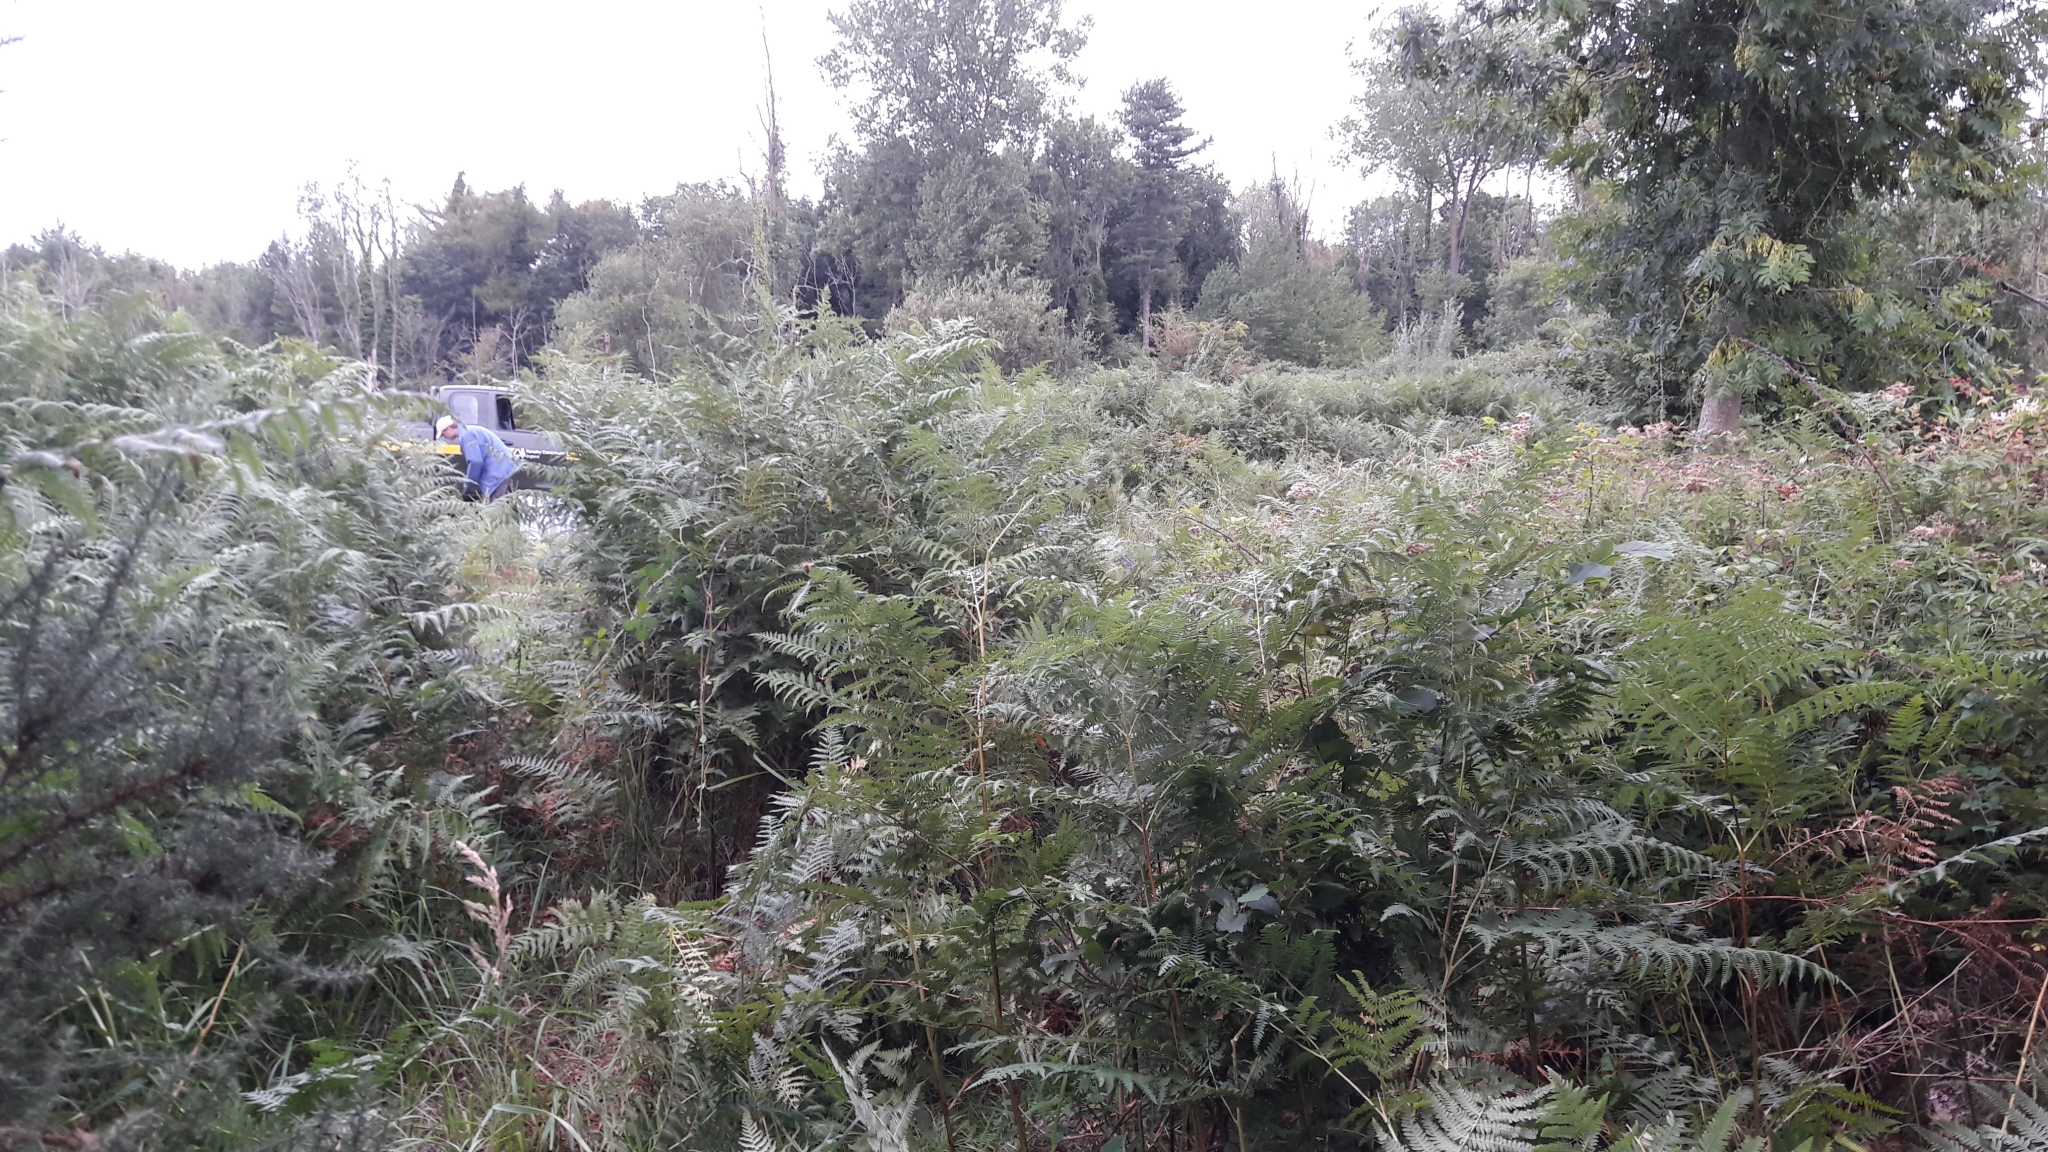 A photo from the FoTF Conservation Event - August 2018 - Gorse Removal at Hockham Hills & Holes : A volunteer through the Bracken